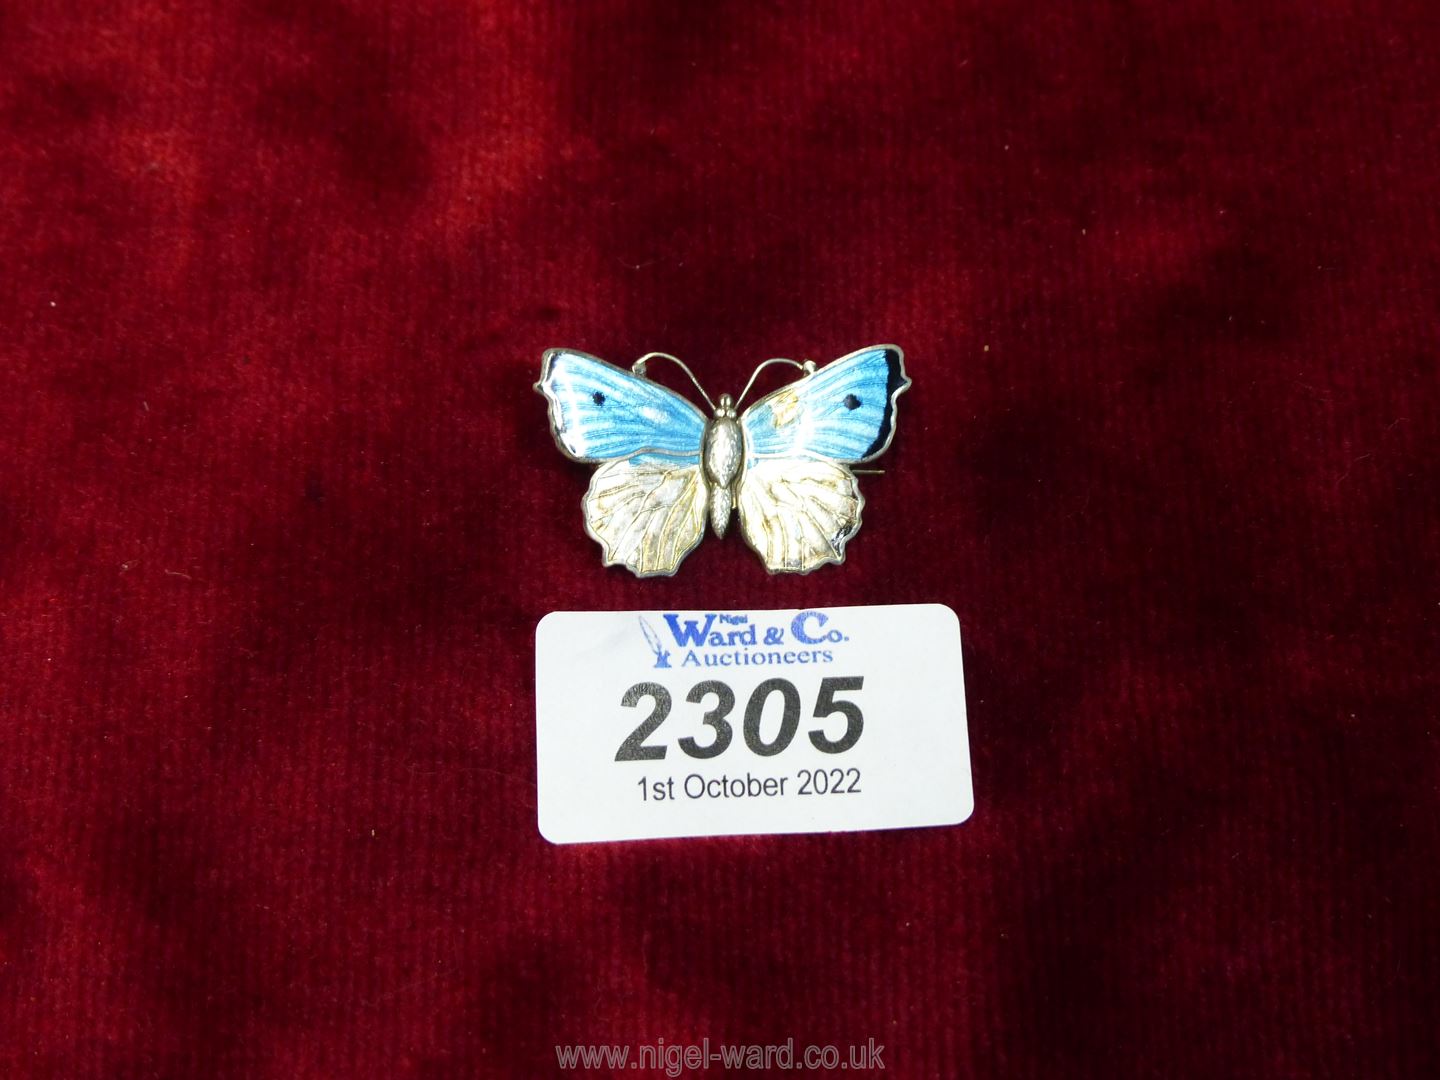 A Charles Horner silver butterfly brooch, Chester (date mark indistinct, possibly 1918).